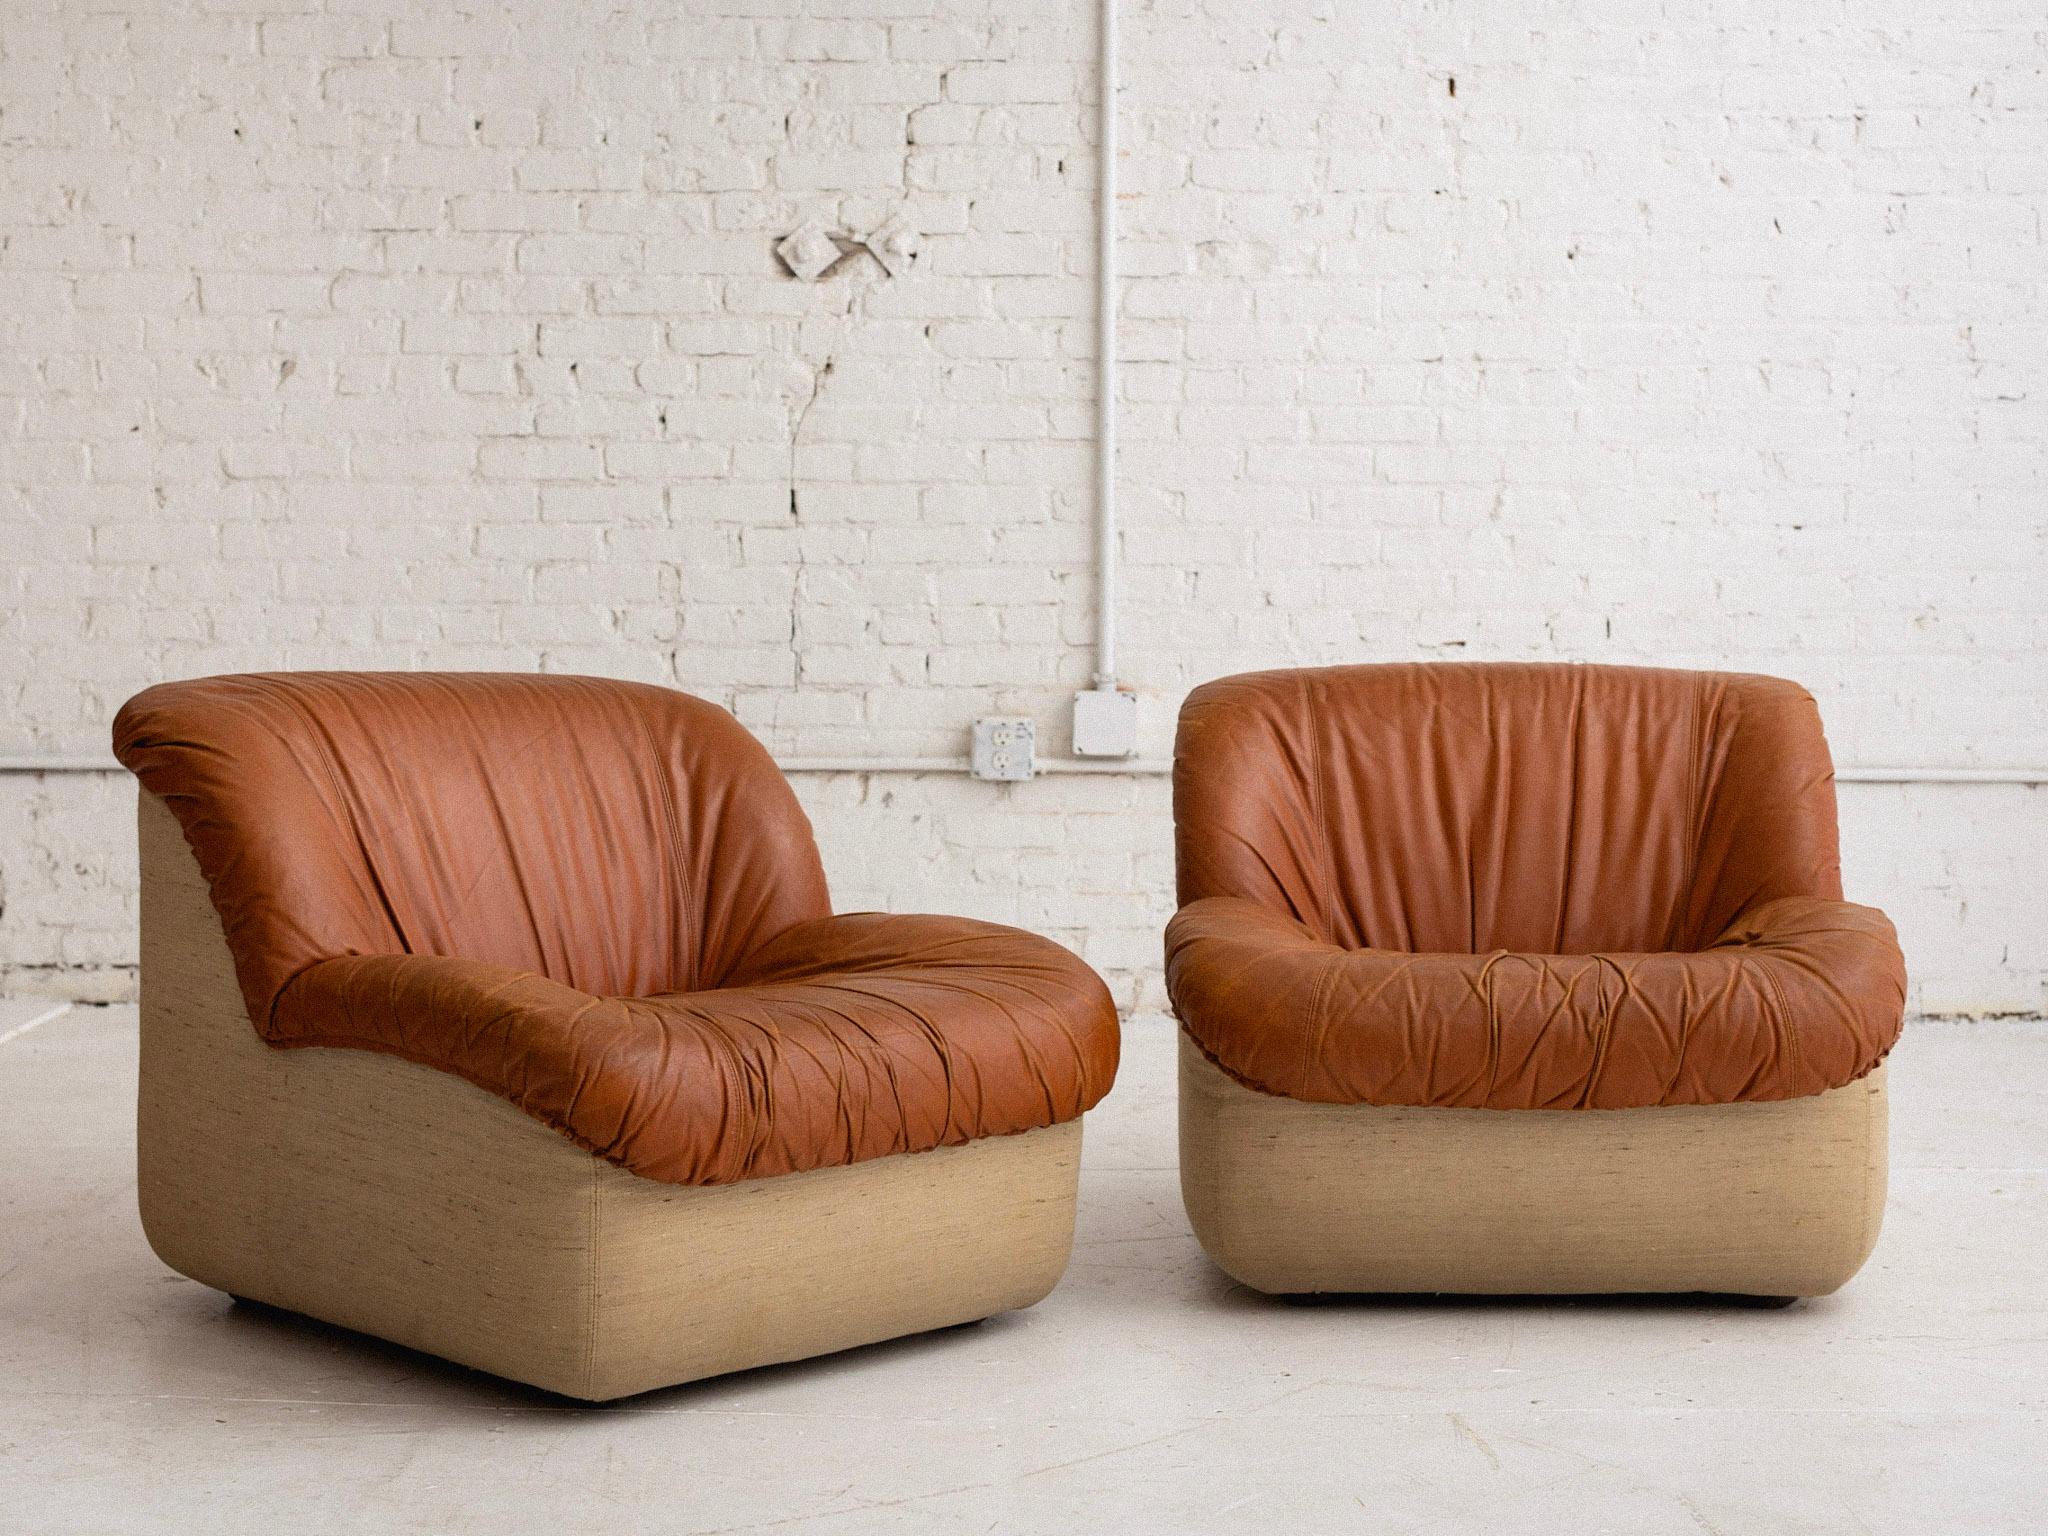 Henning Korch for Swan ‘Caprice’ Leather Chair / Modular Seating For Sale 7